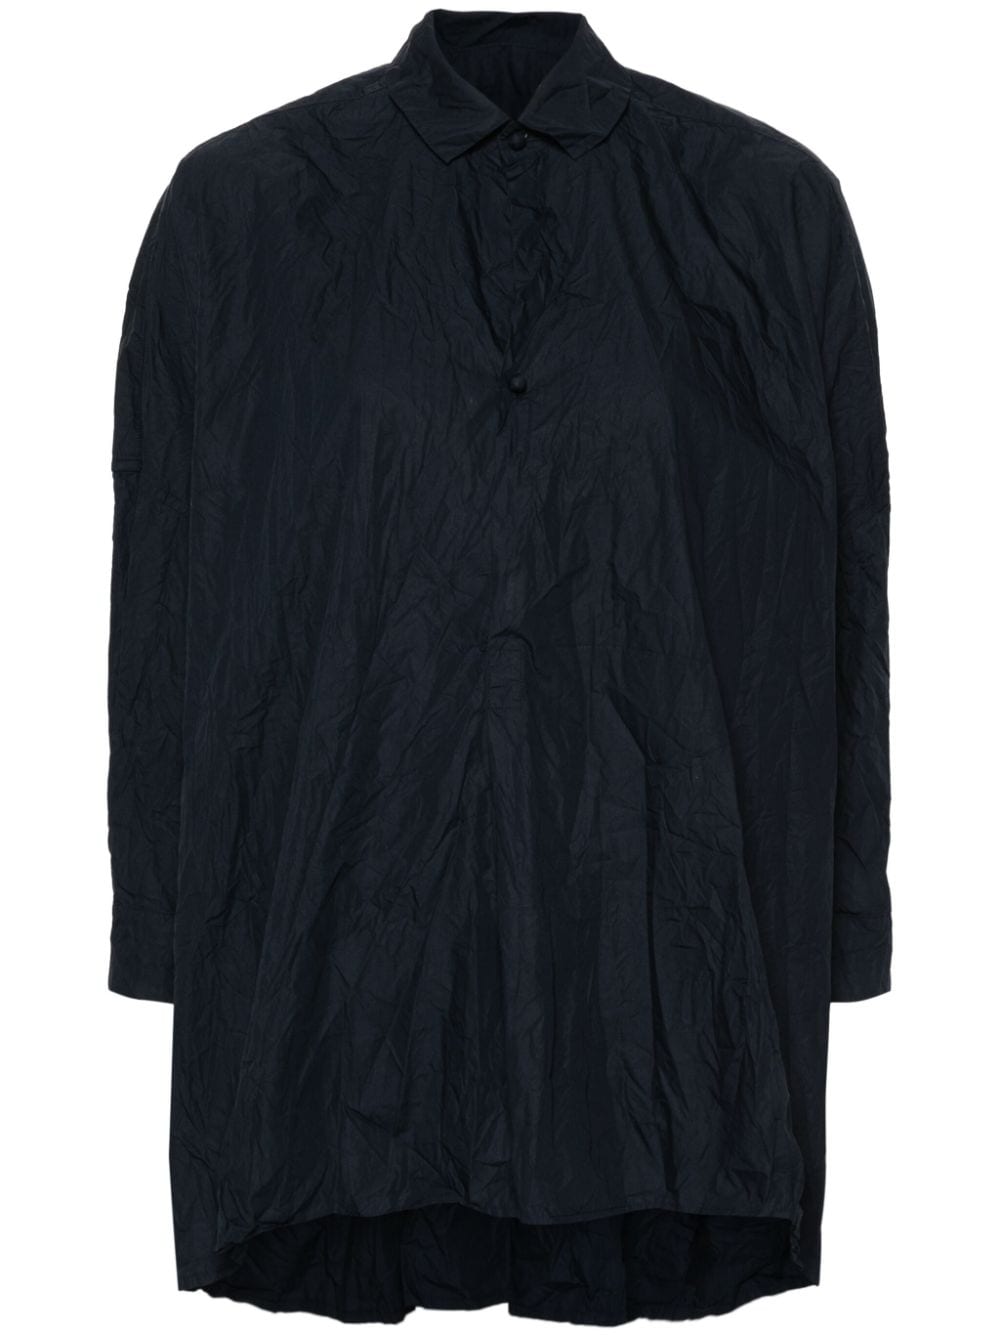 Navy Blue Cotton Shirt with Drop Shoulder and Box-Pleat Detail